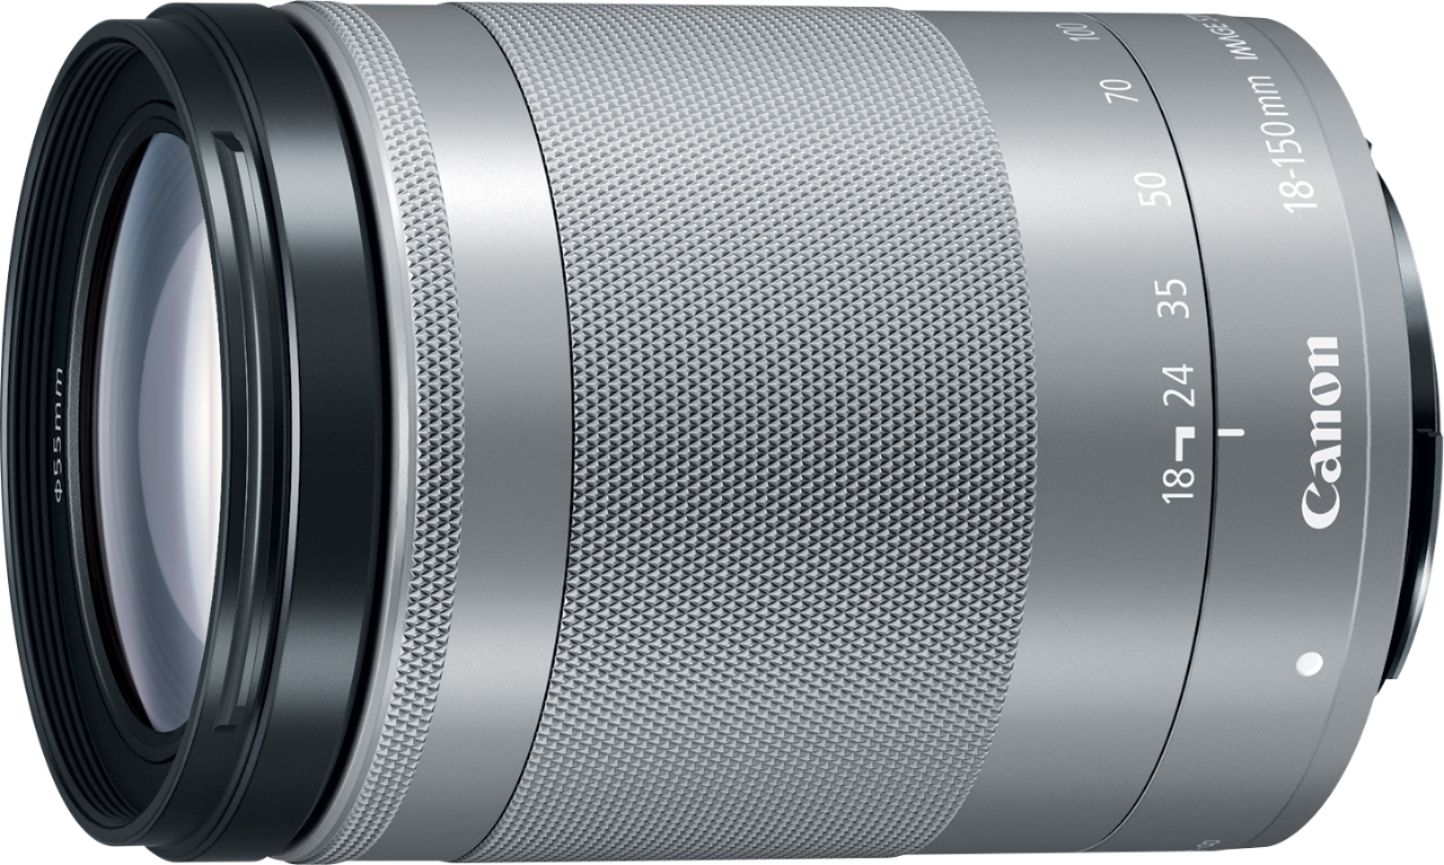 Angle View: Canon - EF-M 18-150mm f/3.5-6.3 IS STM Telephoto Zoom Lens for EOS M Series Cameras - Silver